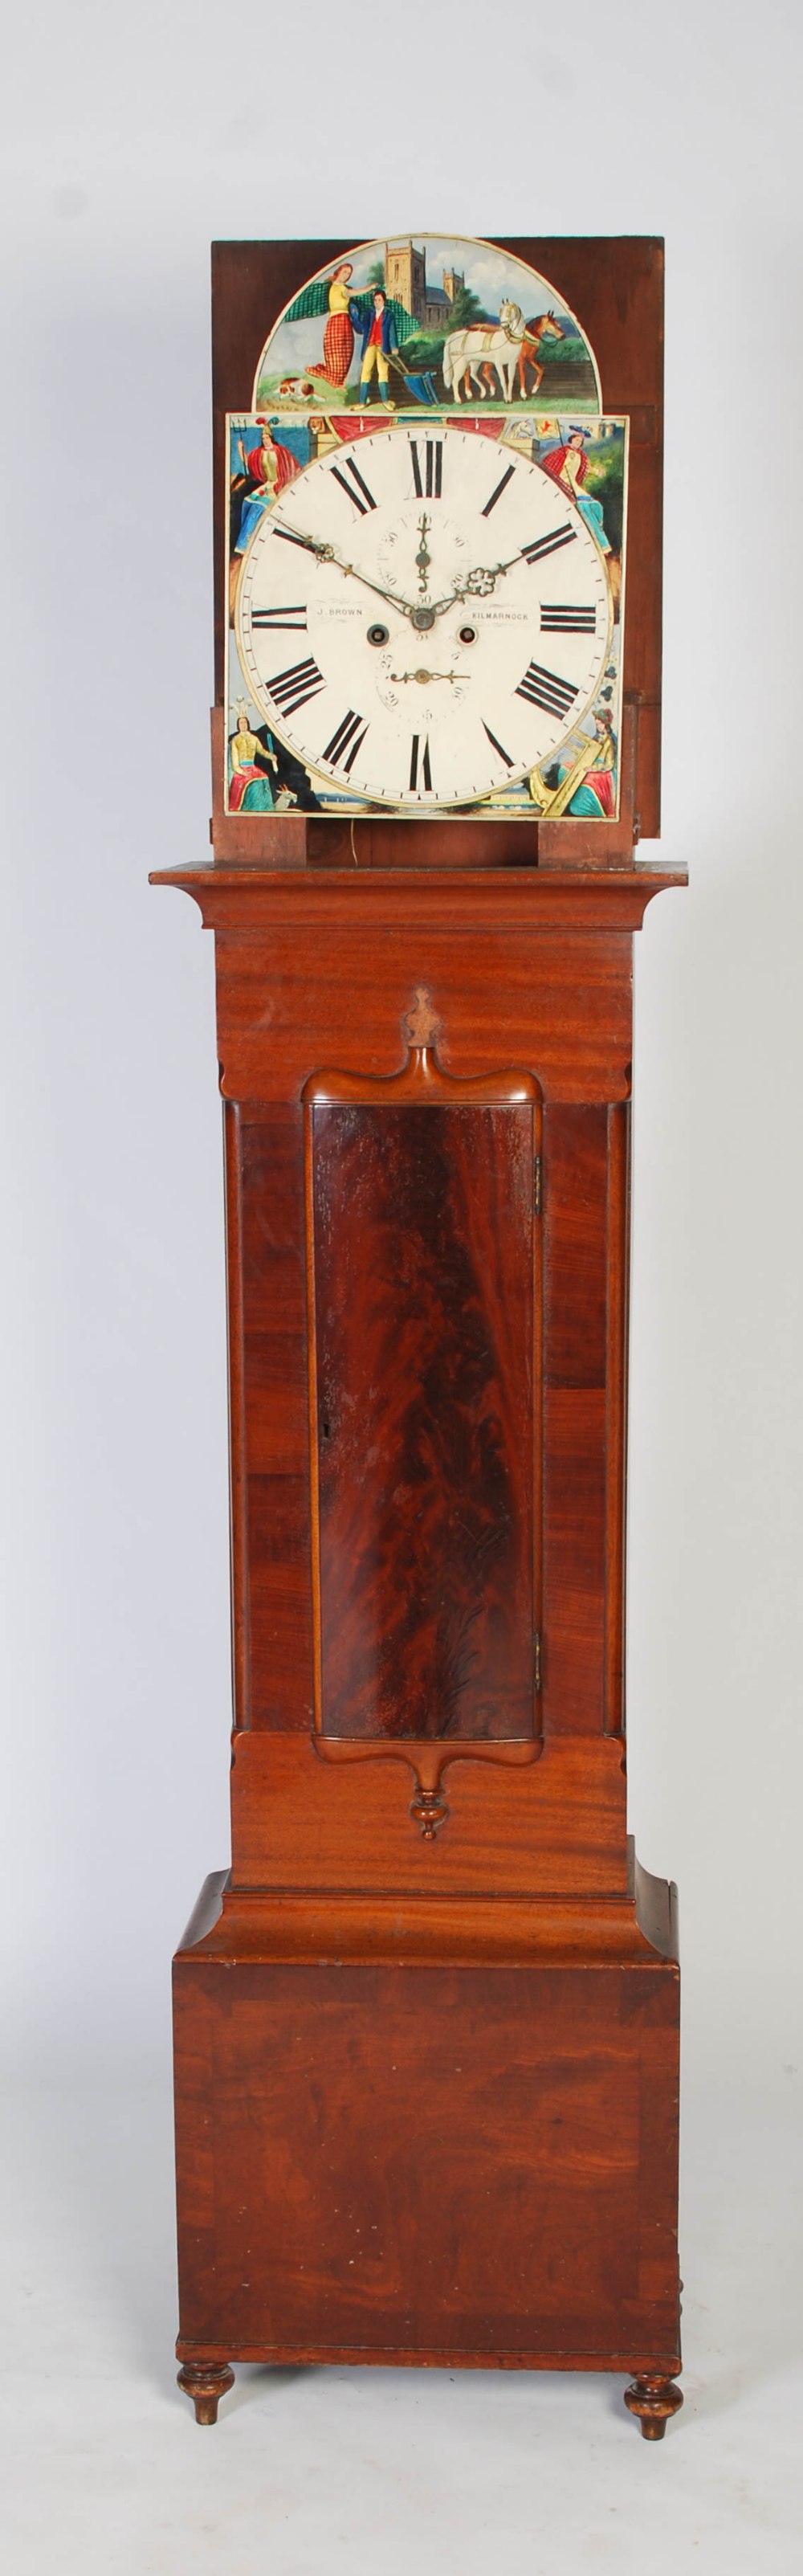 A 19th century Scottish mahogany longcase clock J. Brown, Kilmarnock, the caddy top hood with carved - Image 2 of 9